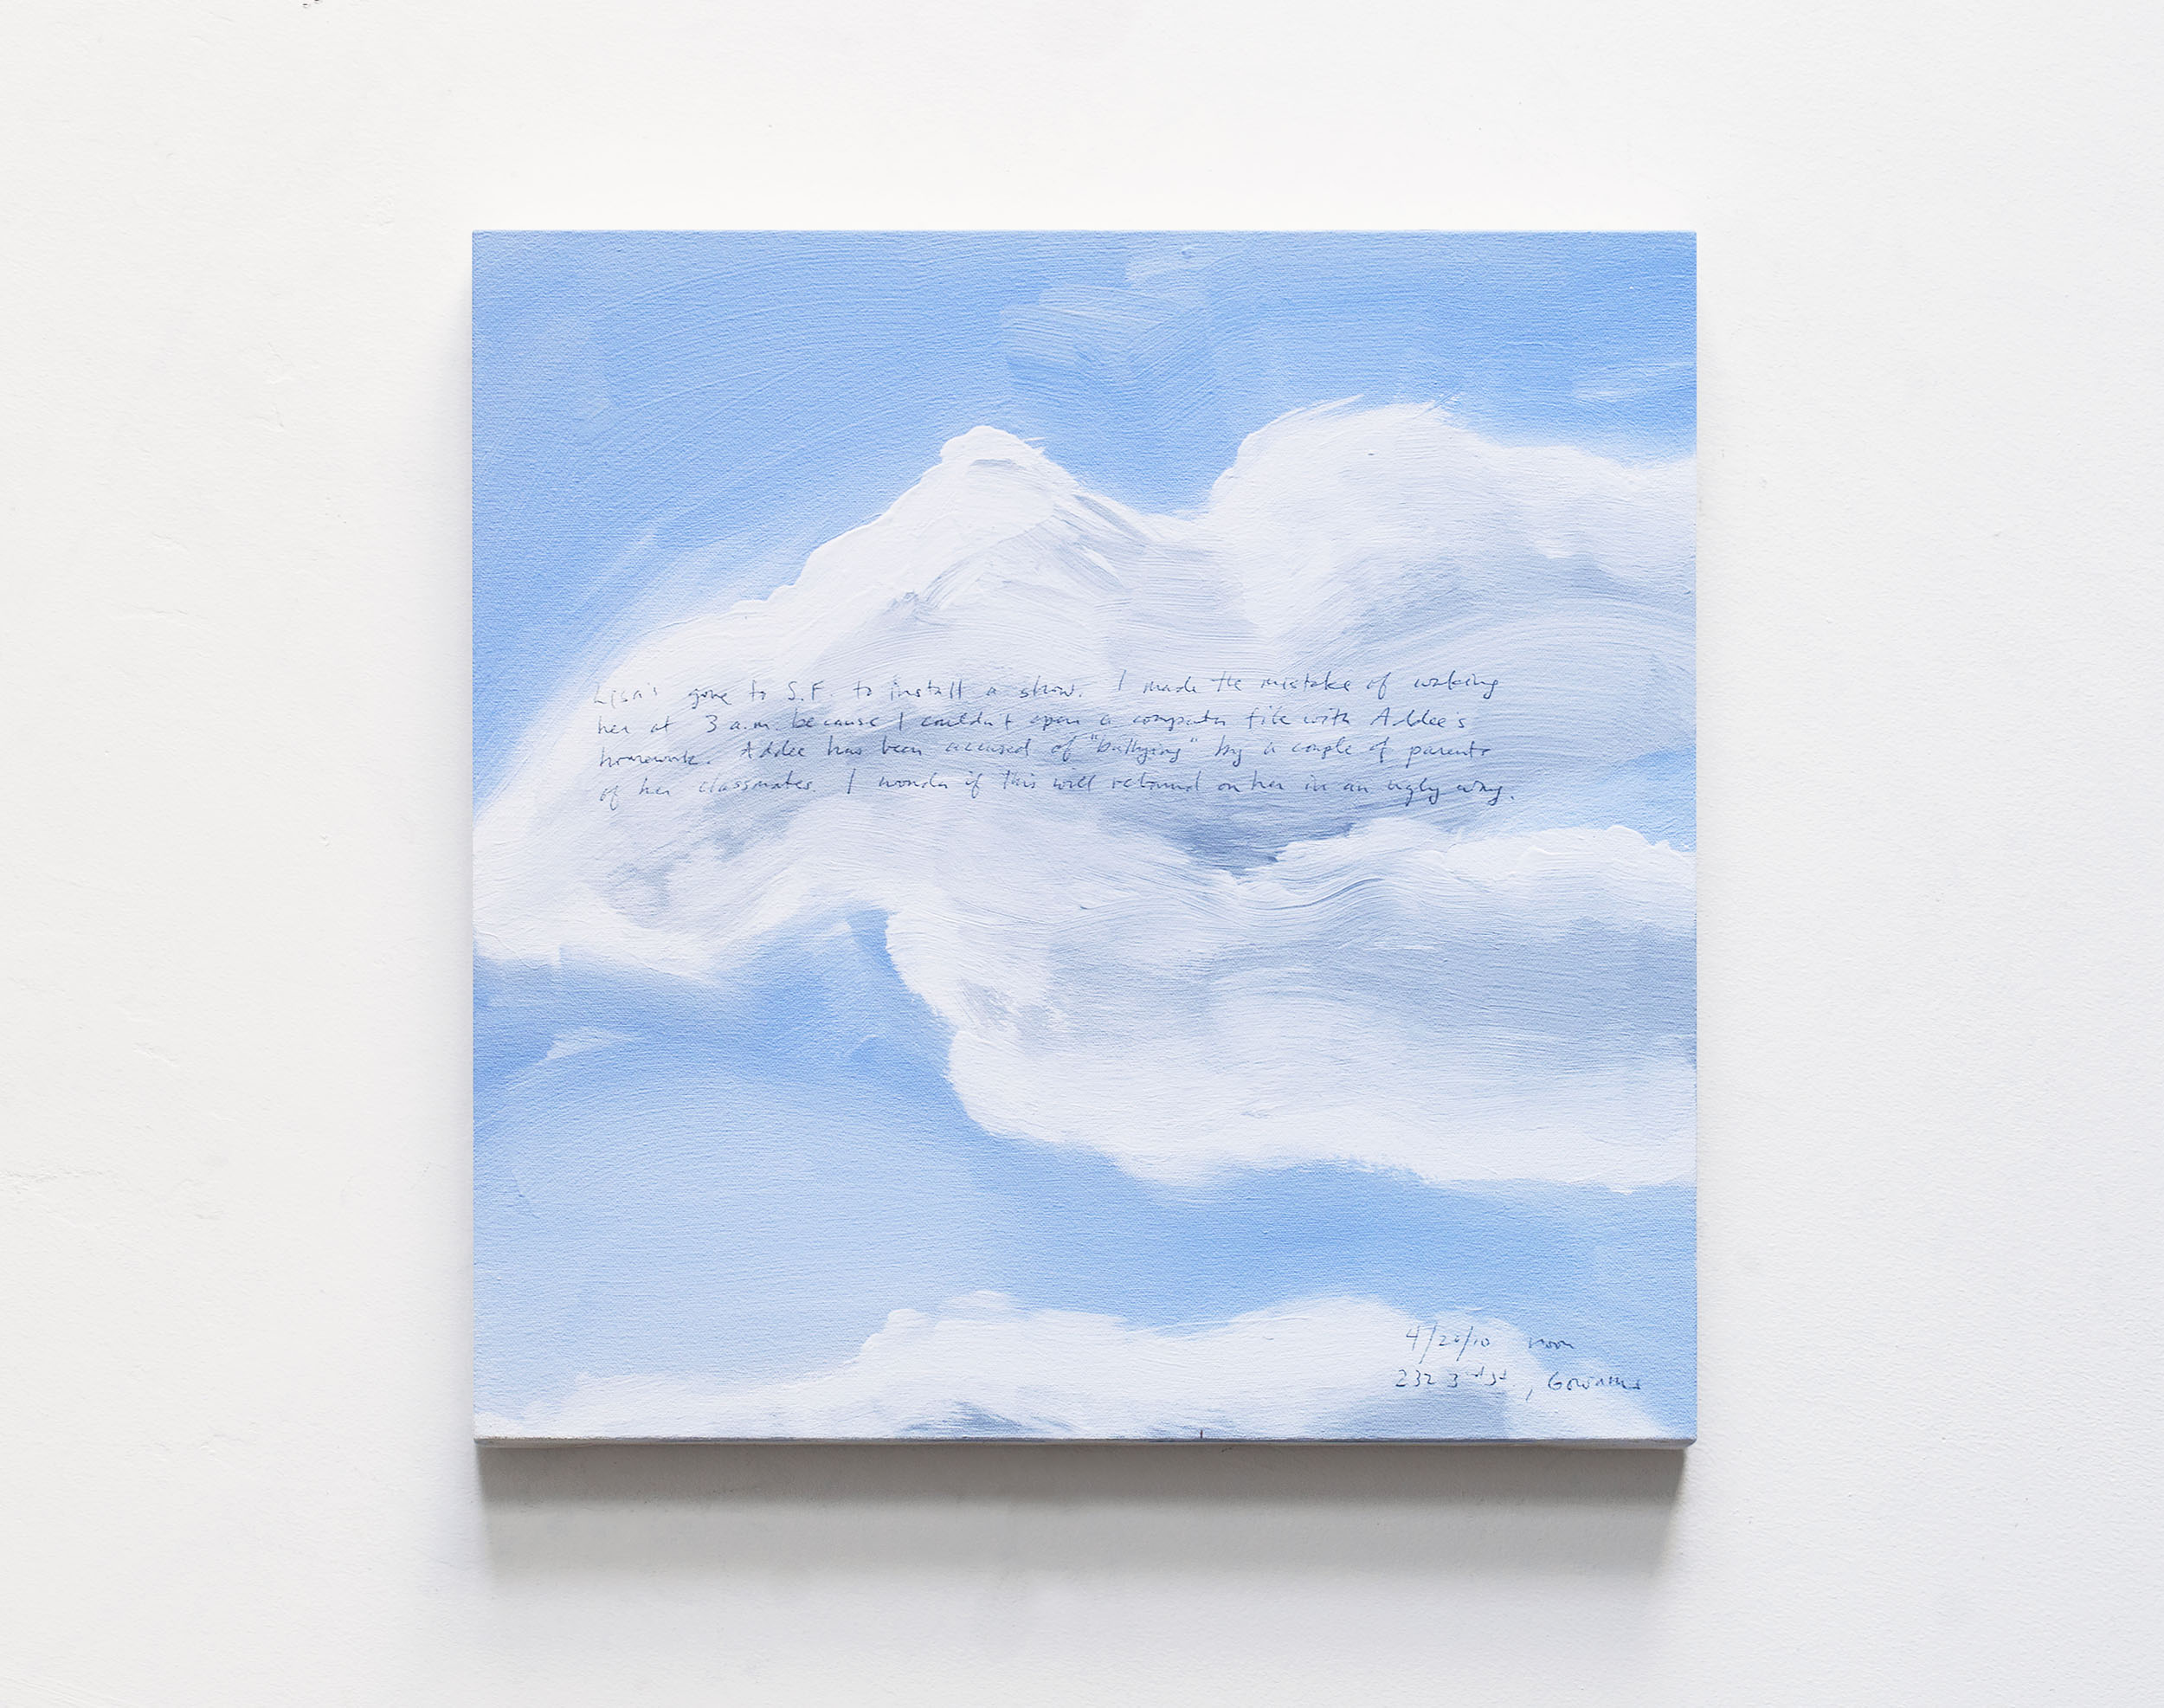 A 14 × 14 inch, acrylic painting of the sky. A journal entry is handwritten on the painting:

“Lisa’s gone to S.F. to install a show. I made the mistake of waking her at 3 a.m. because I couldn’t open a computer file with Addee’s Homework. Addee has been accused of “bullying” by a couple of parents of her classmates. I wonder if this will rebound on her in an ugly way.

4/20/10 noon
232 3rd St., Gowanus”